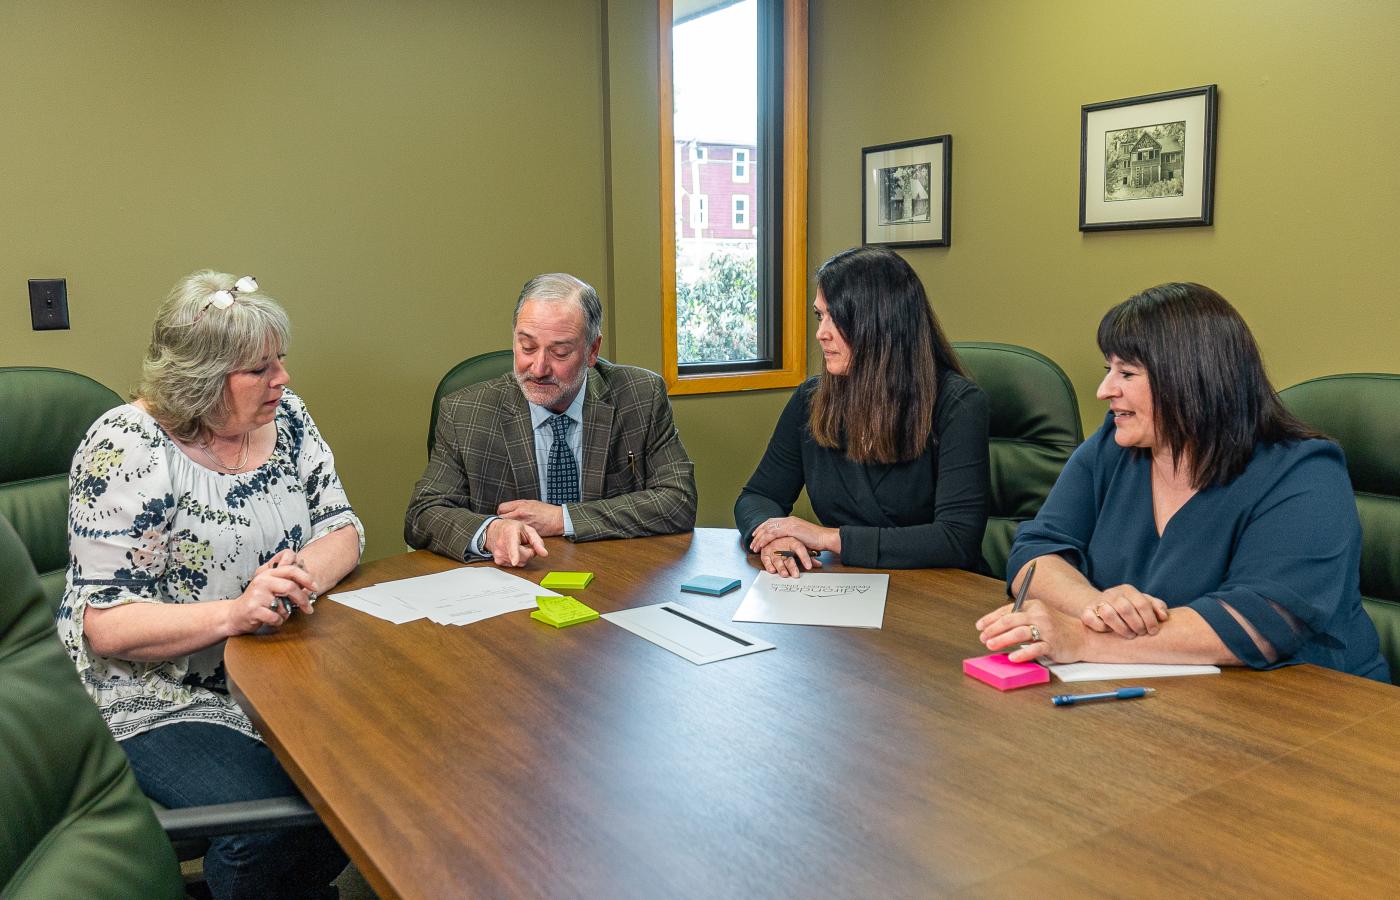 Russ Cronin, CEO and President of Adirondack Regional Federal Credit Union in the Tupper Lake branch meeting room with other staff reviewing paperwork